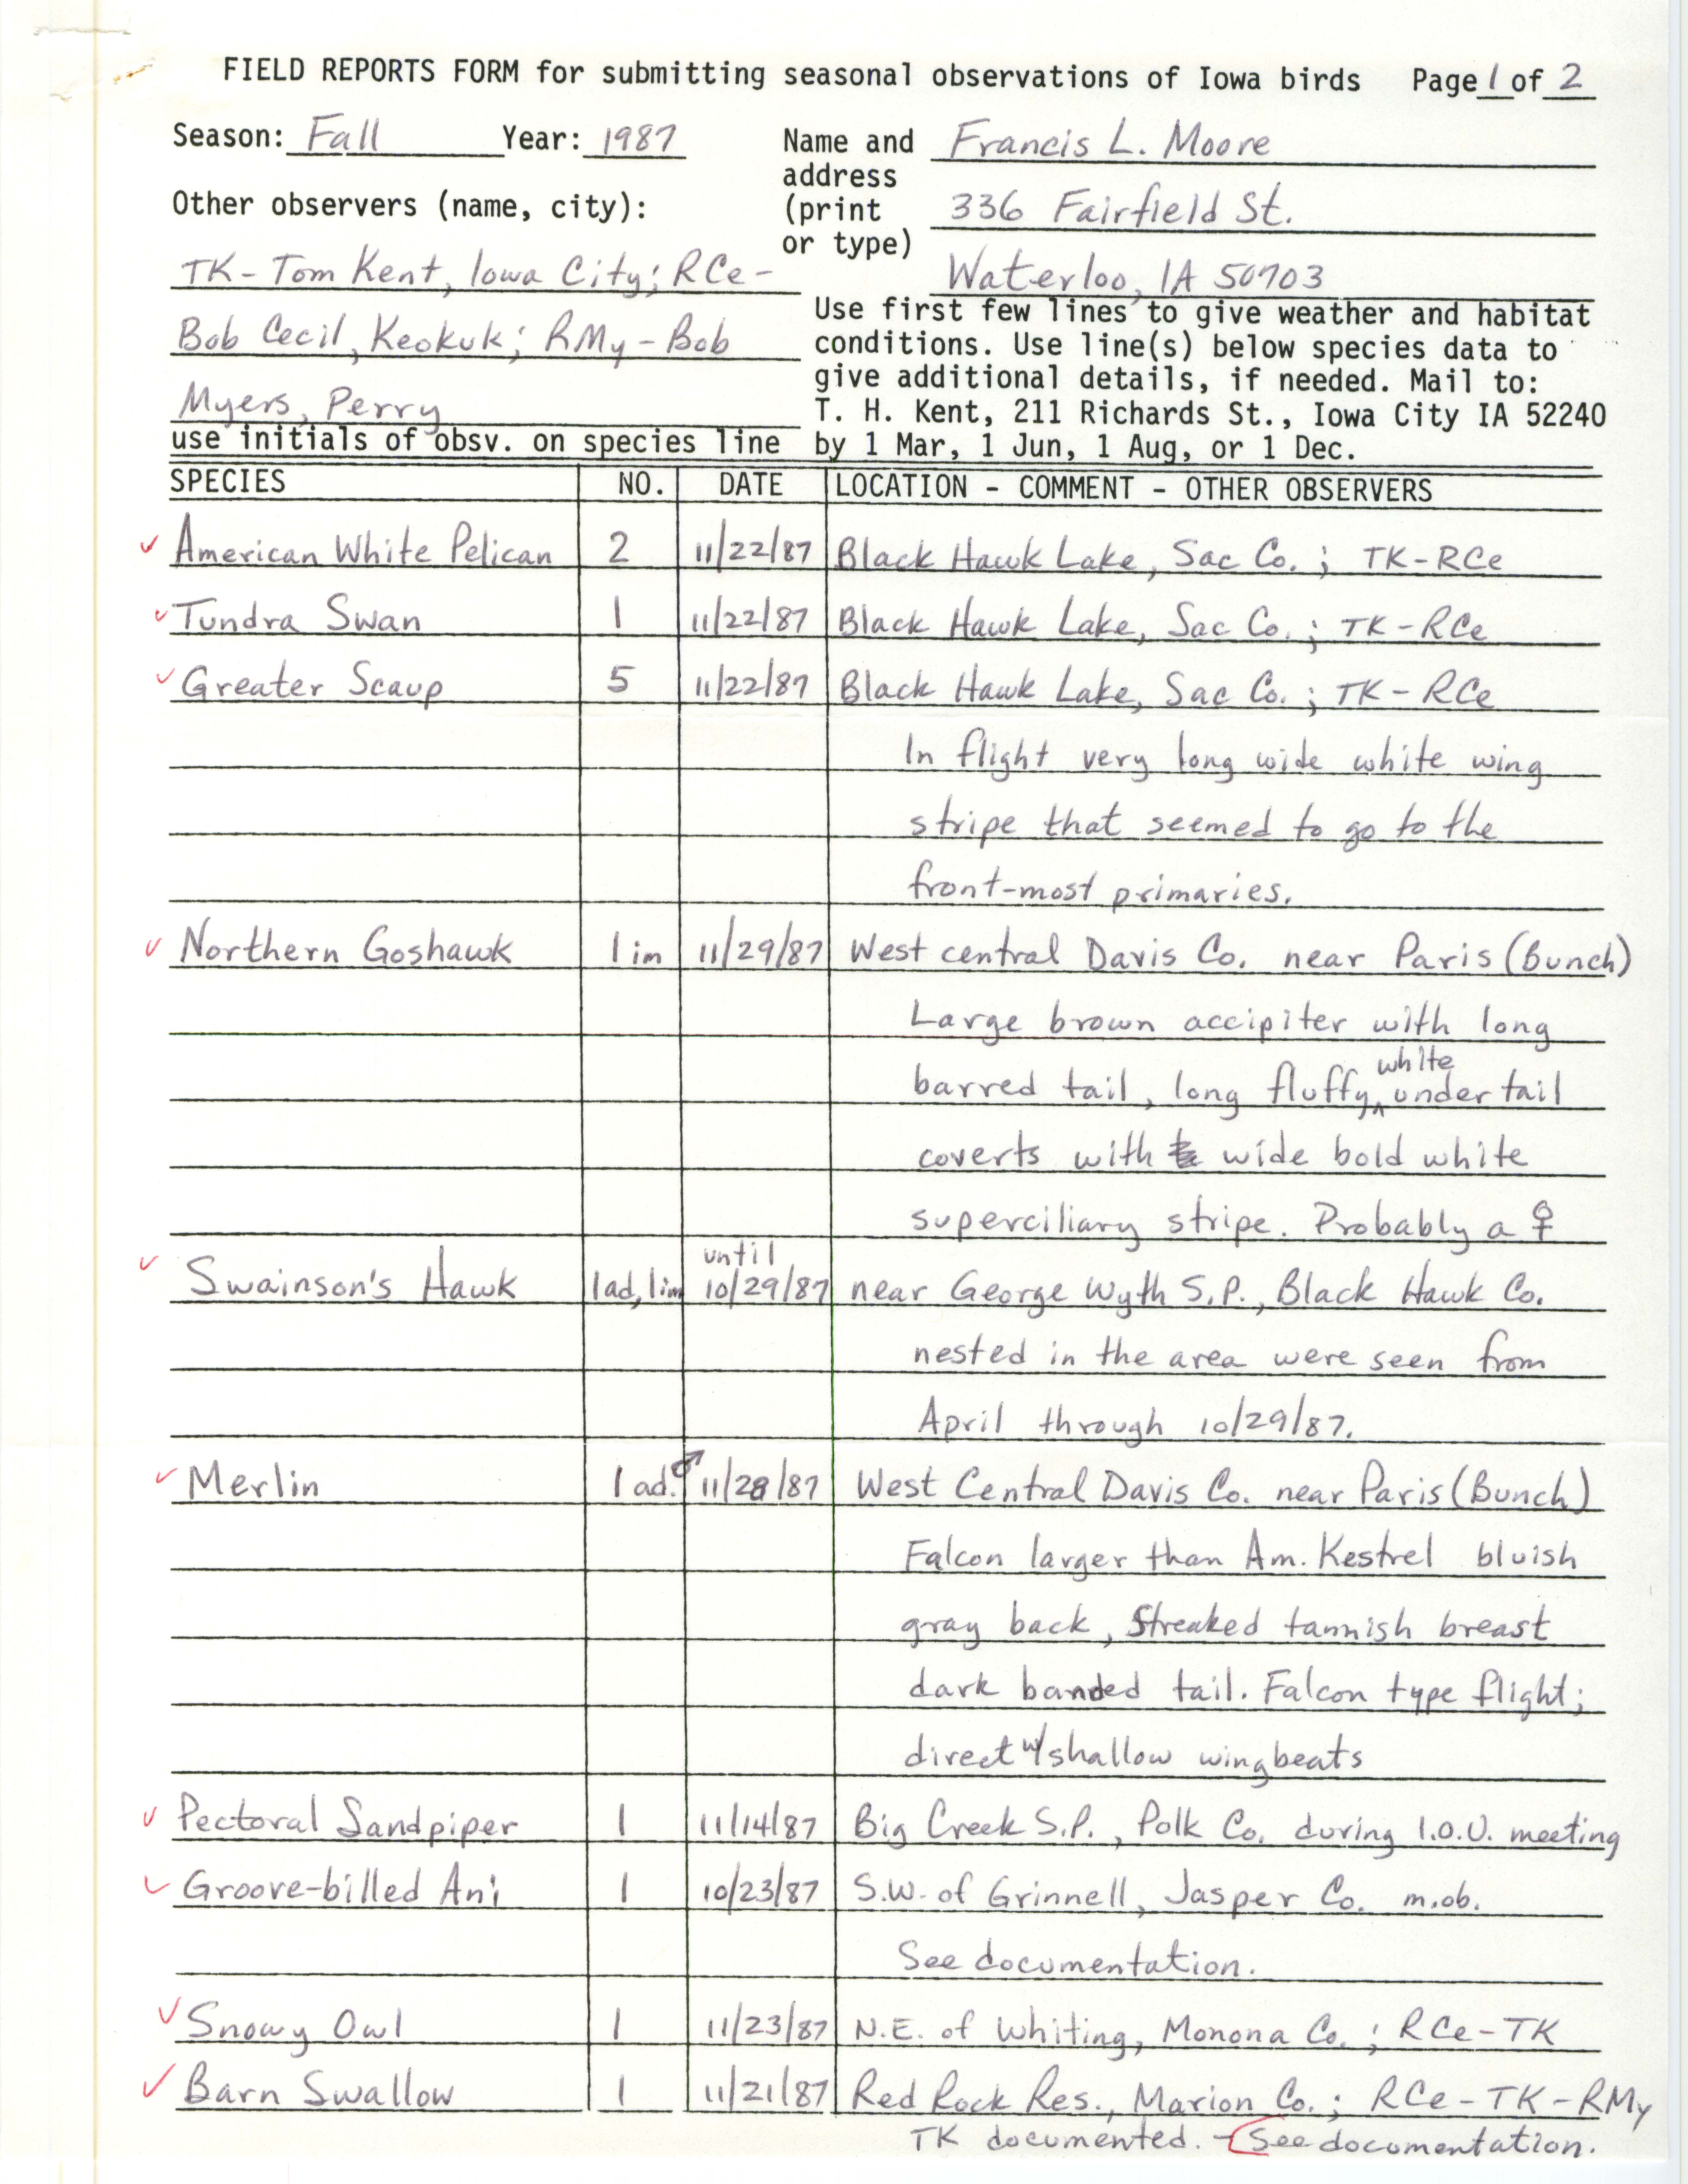 Field reports form for submitting seasonal observations of Iowa birds, Francis L. Moore, fall 1987